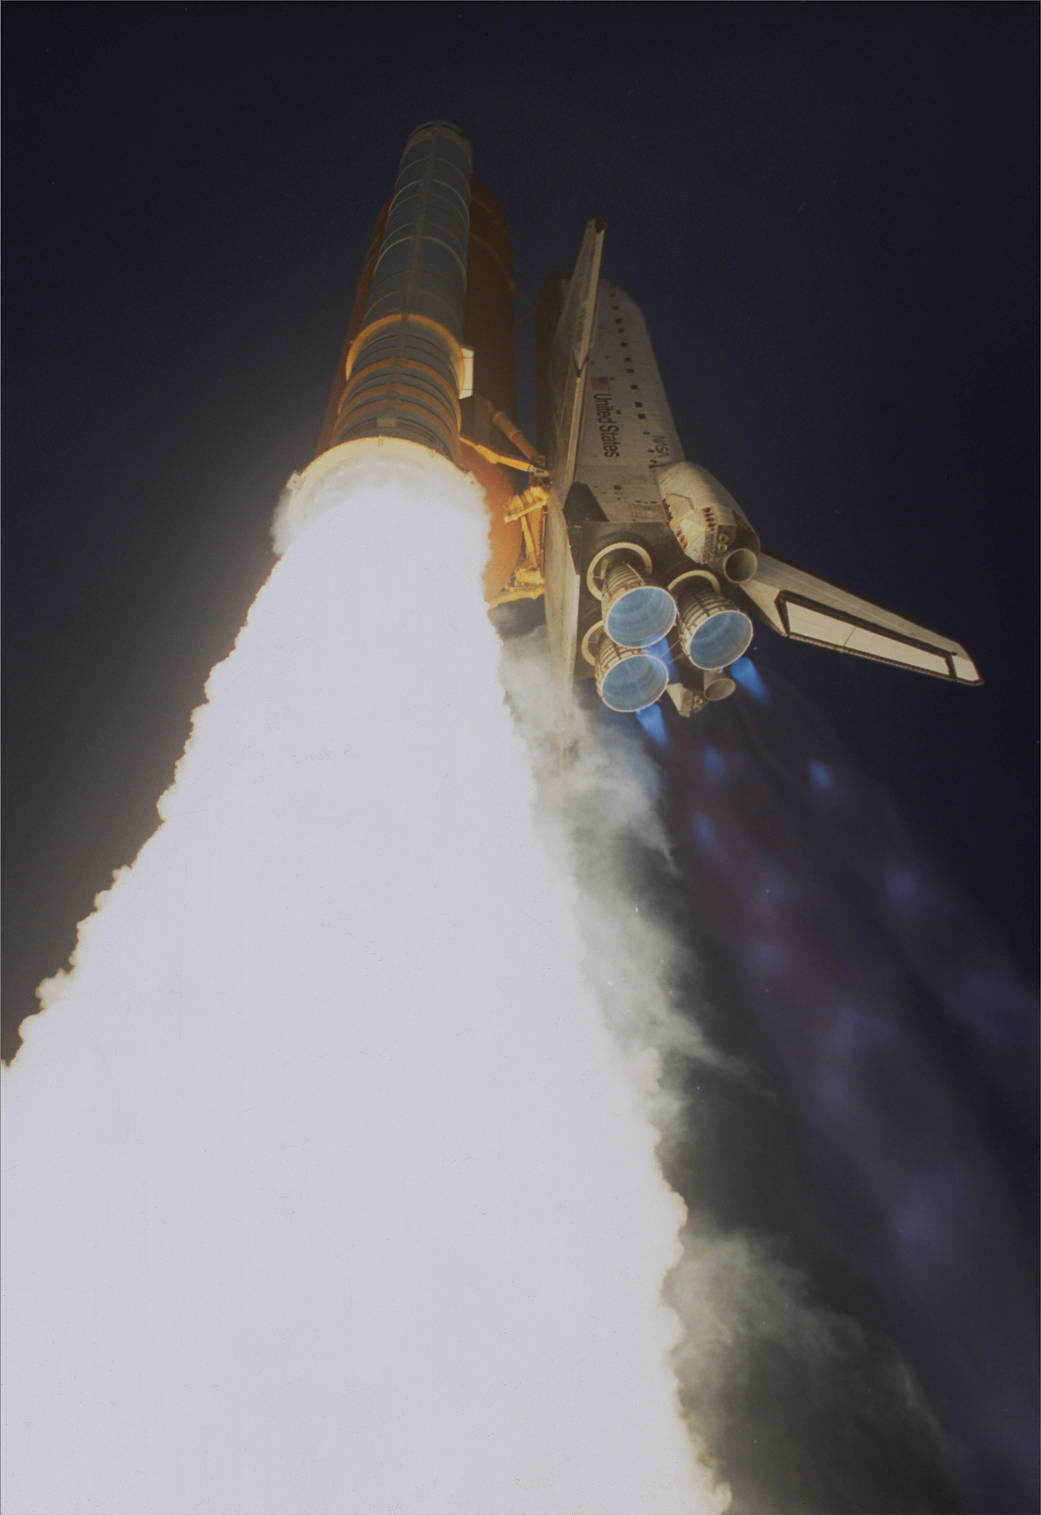 This week in 1991, STS-48 launched aboard space shuttle Discovery to deploy the Upper Atmosphere Research Satellite.